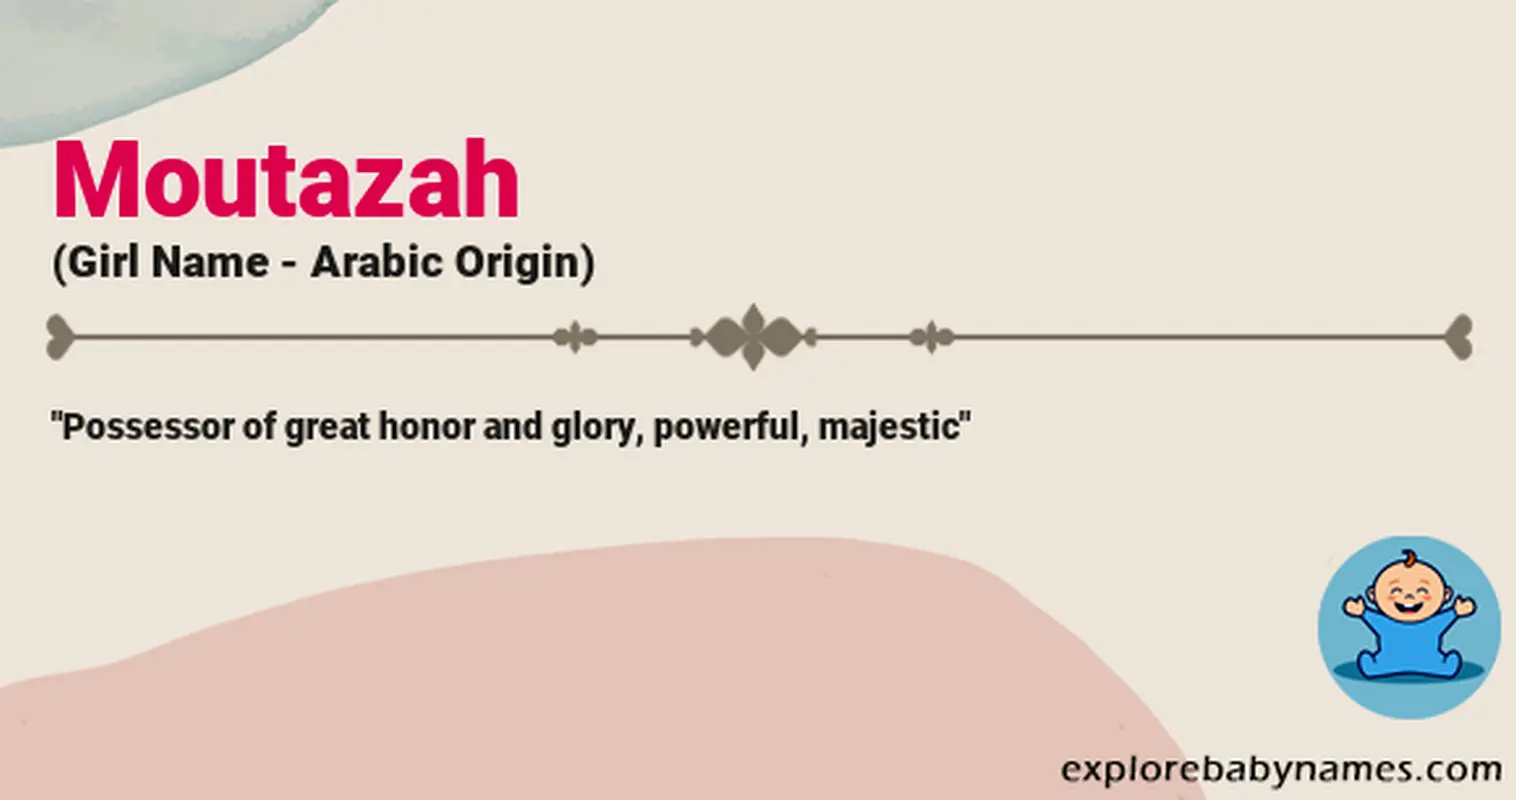 Meaning of Moutazah